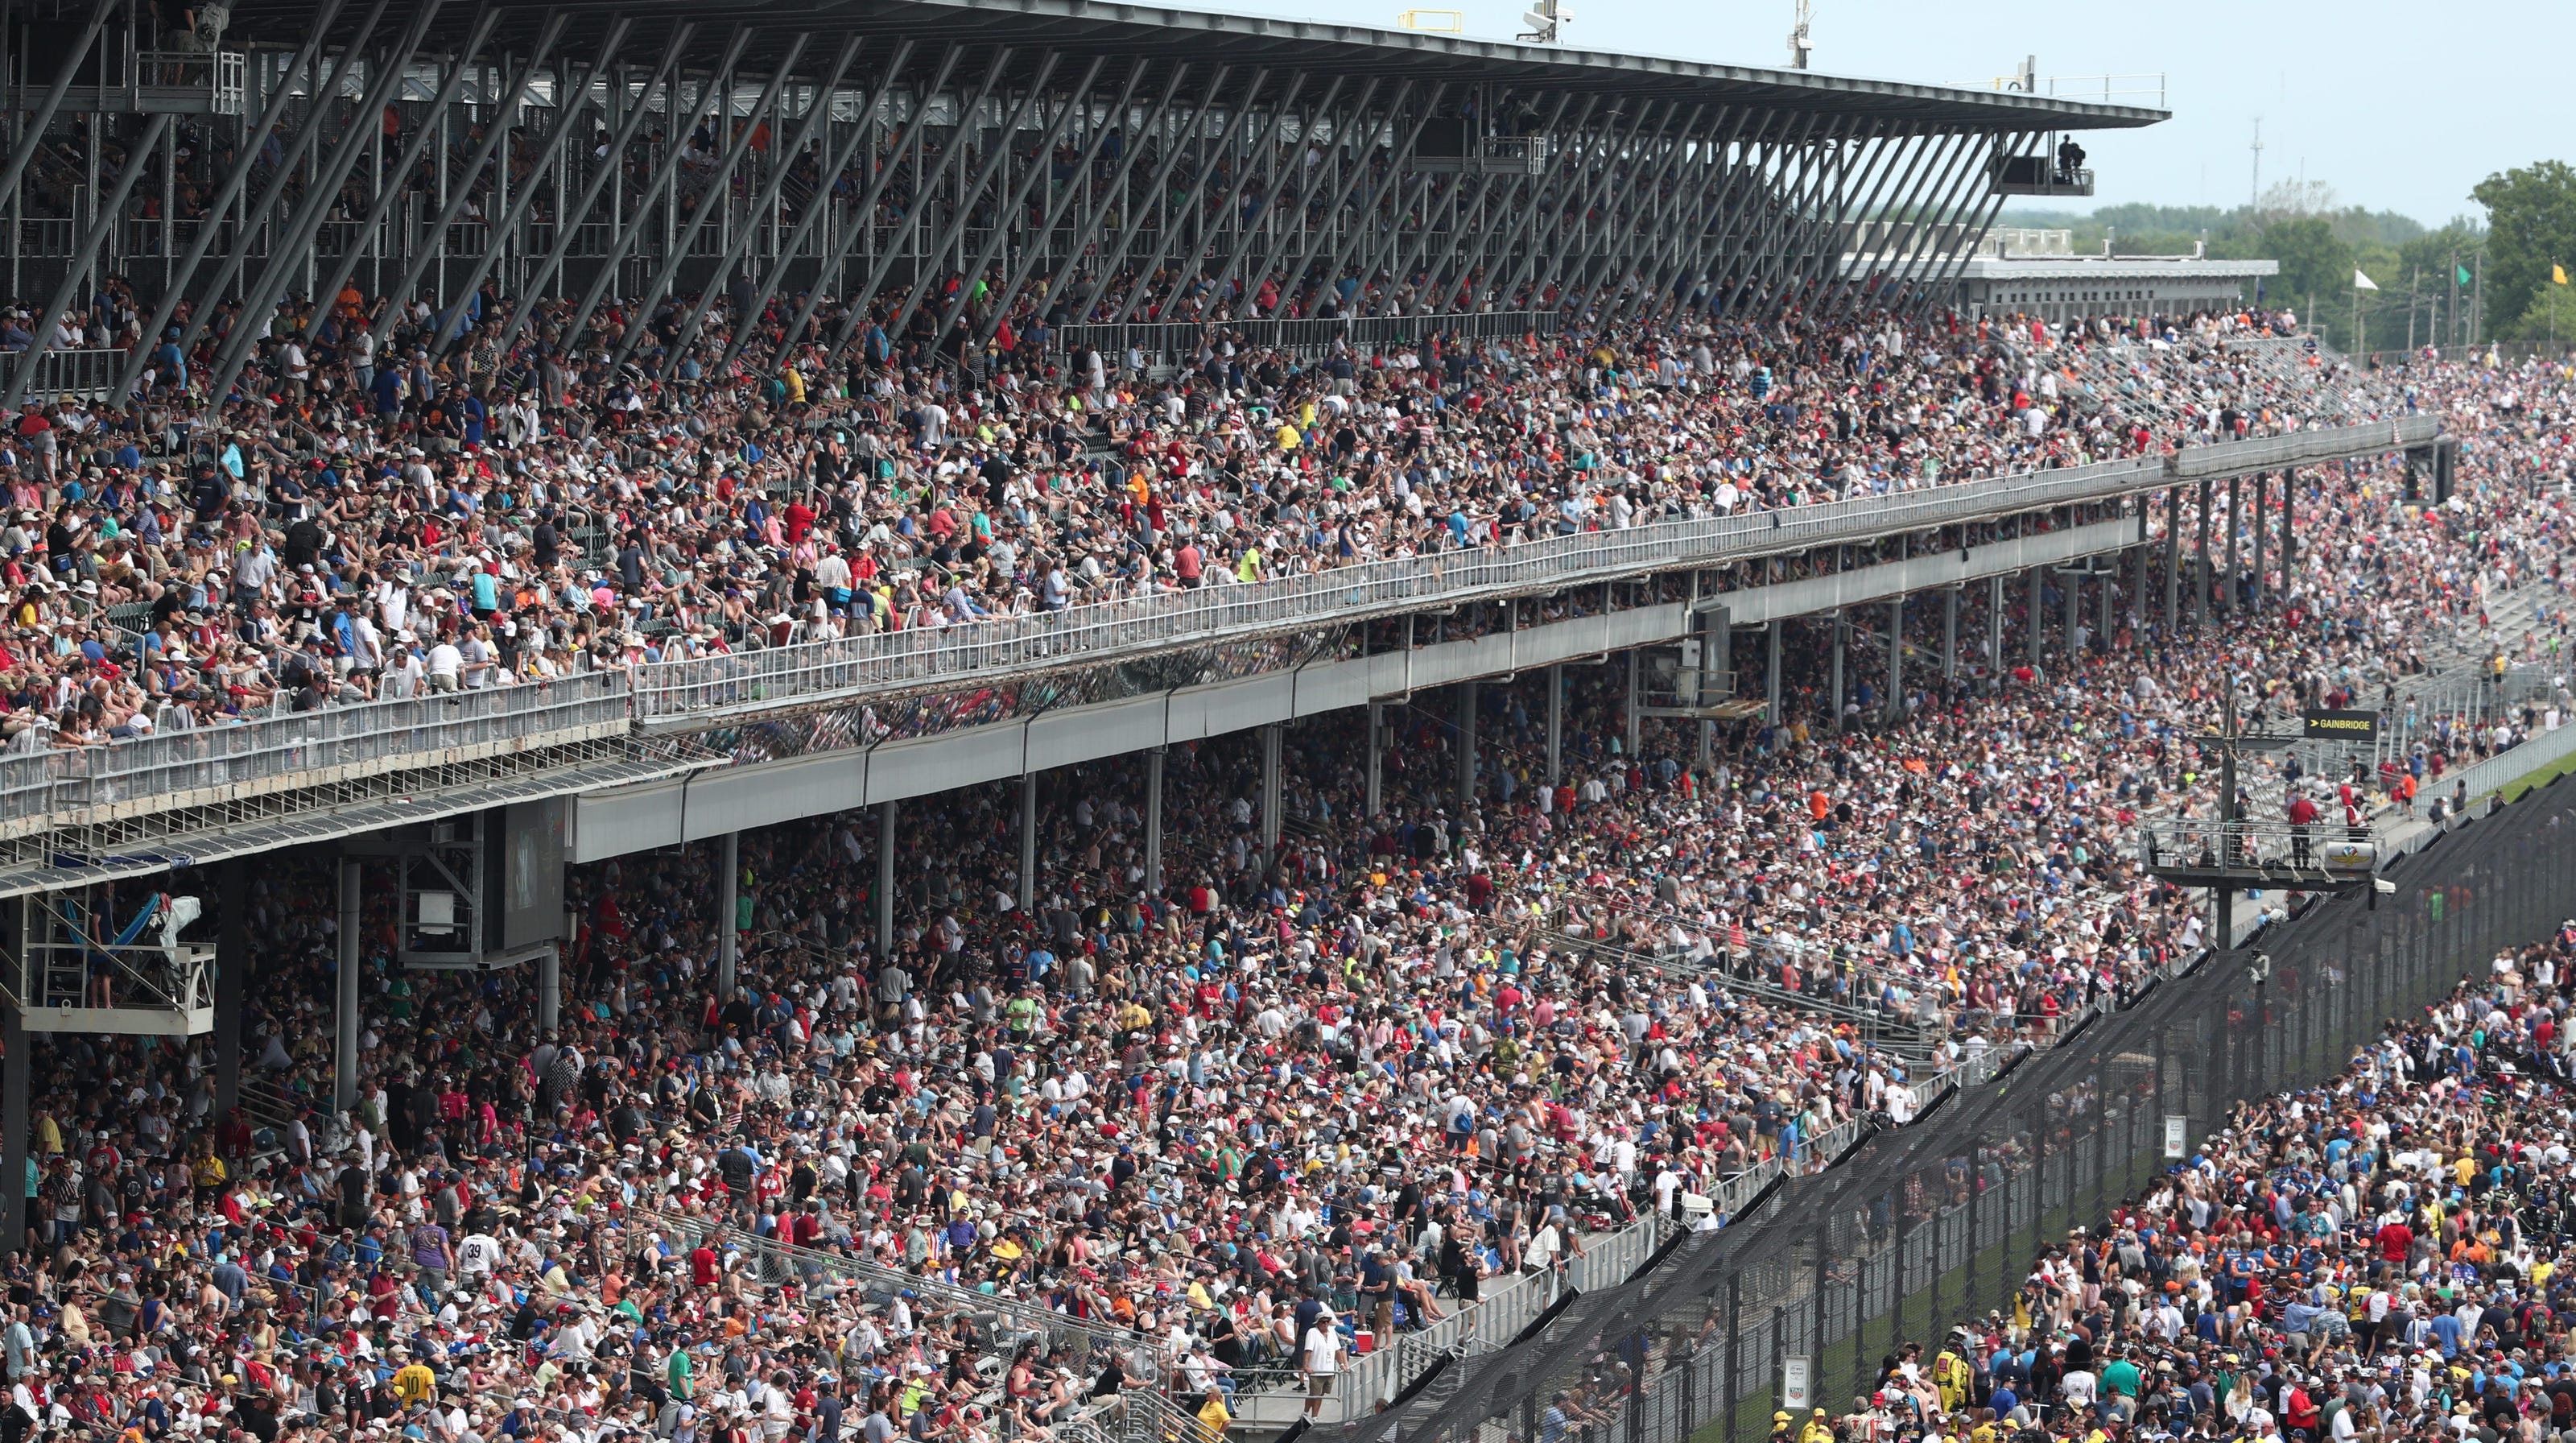 Indy 500 crowd Attendance down from 2018